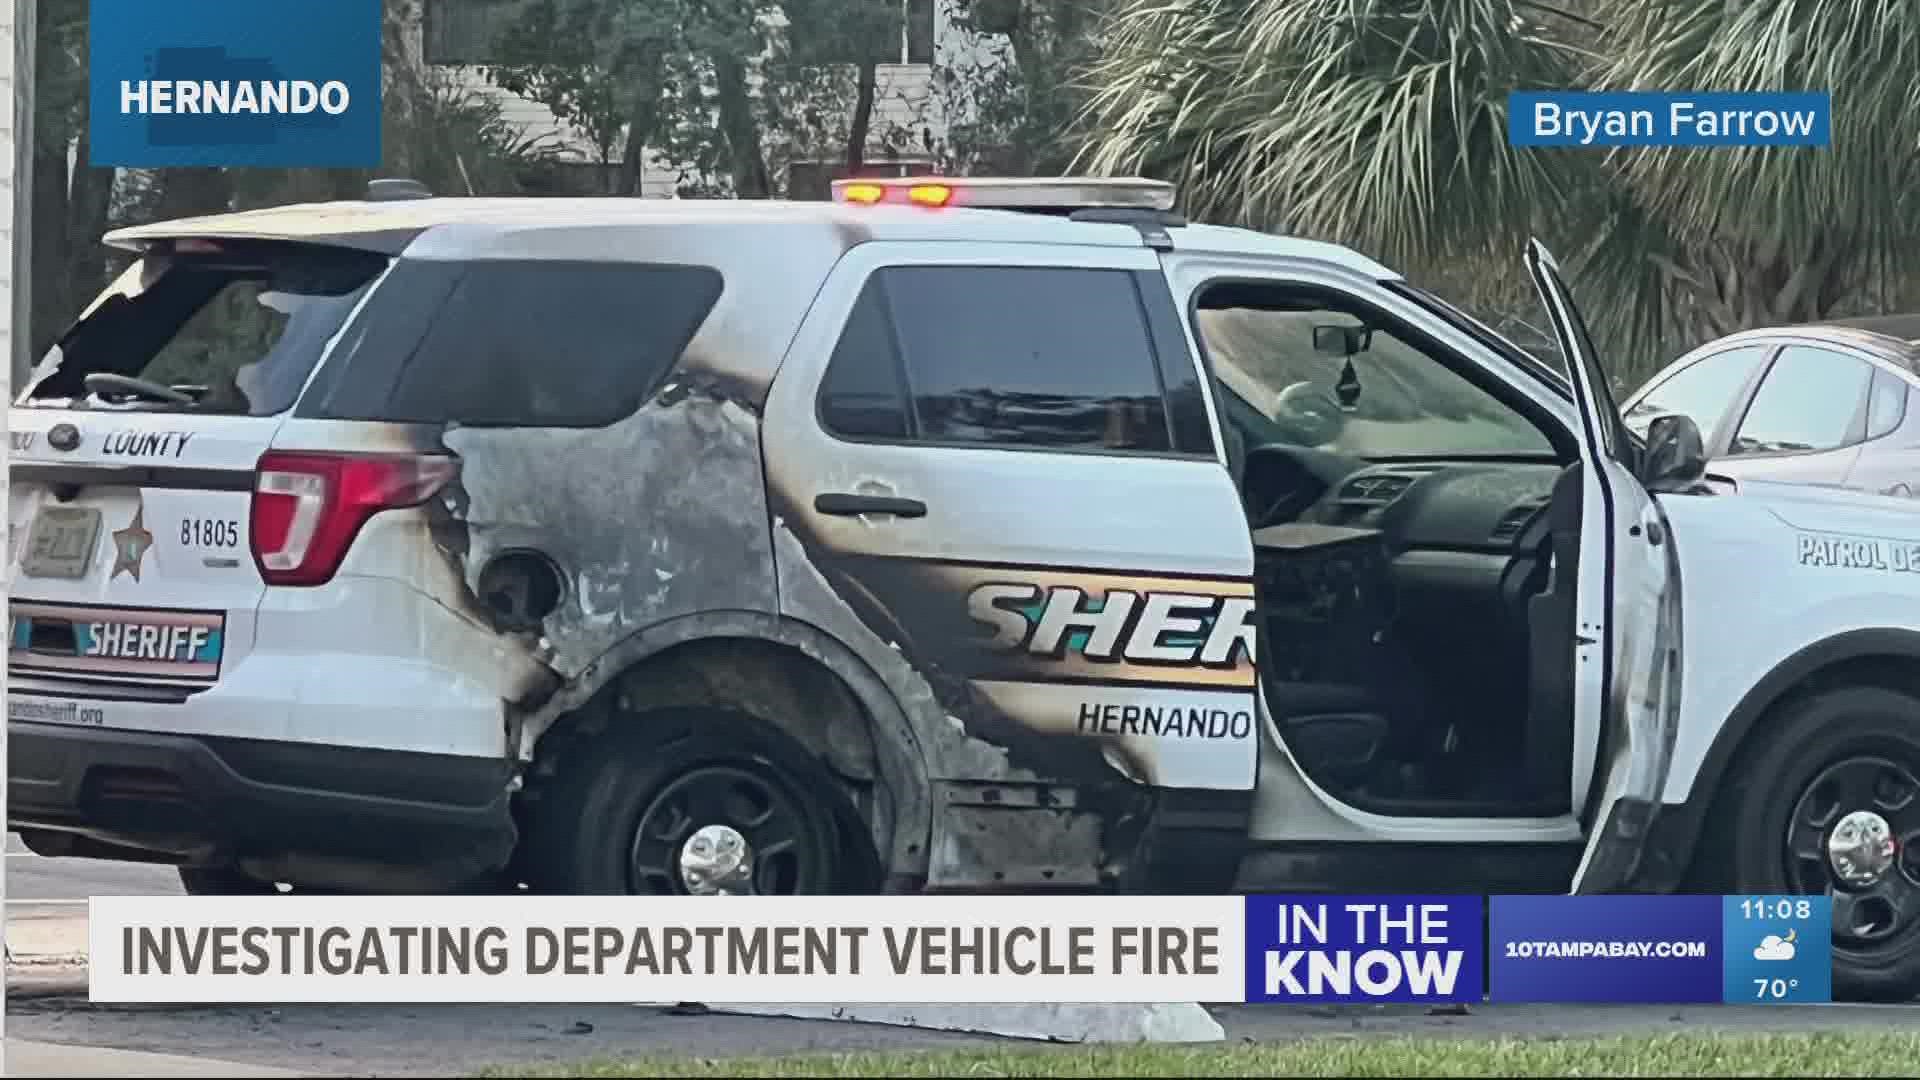 Photos of the patrol SUV show heavy fire damage on the right, backside of the car. The back window is also broken out.